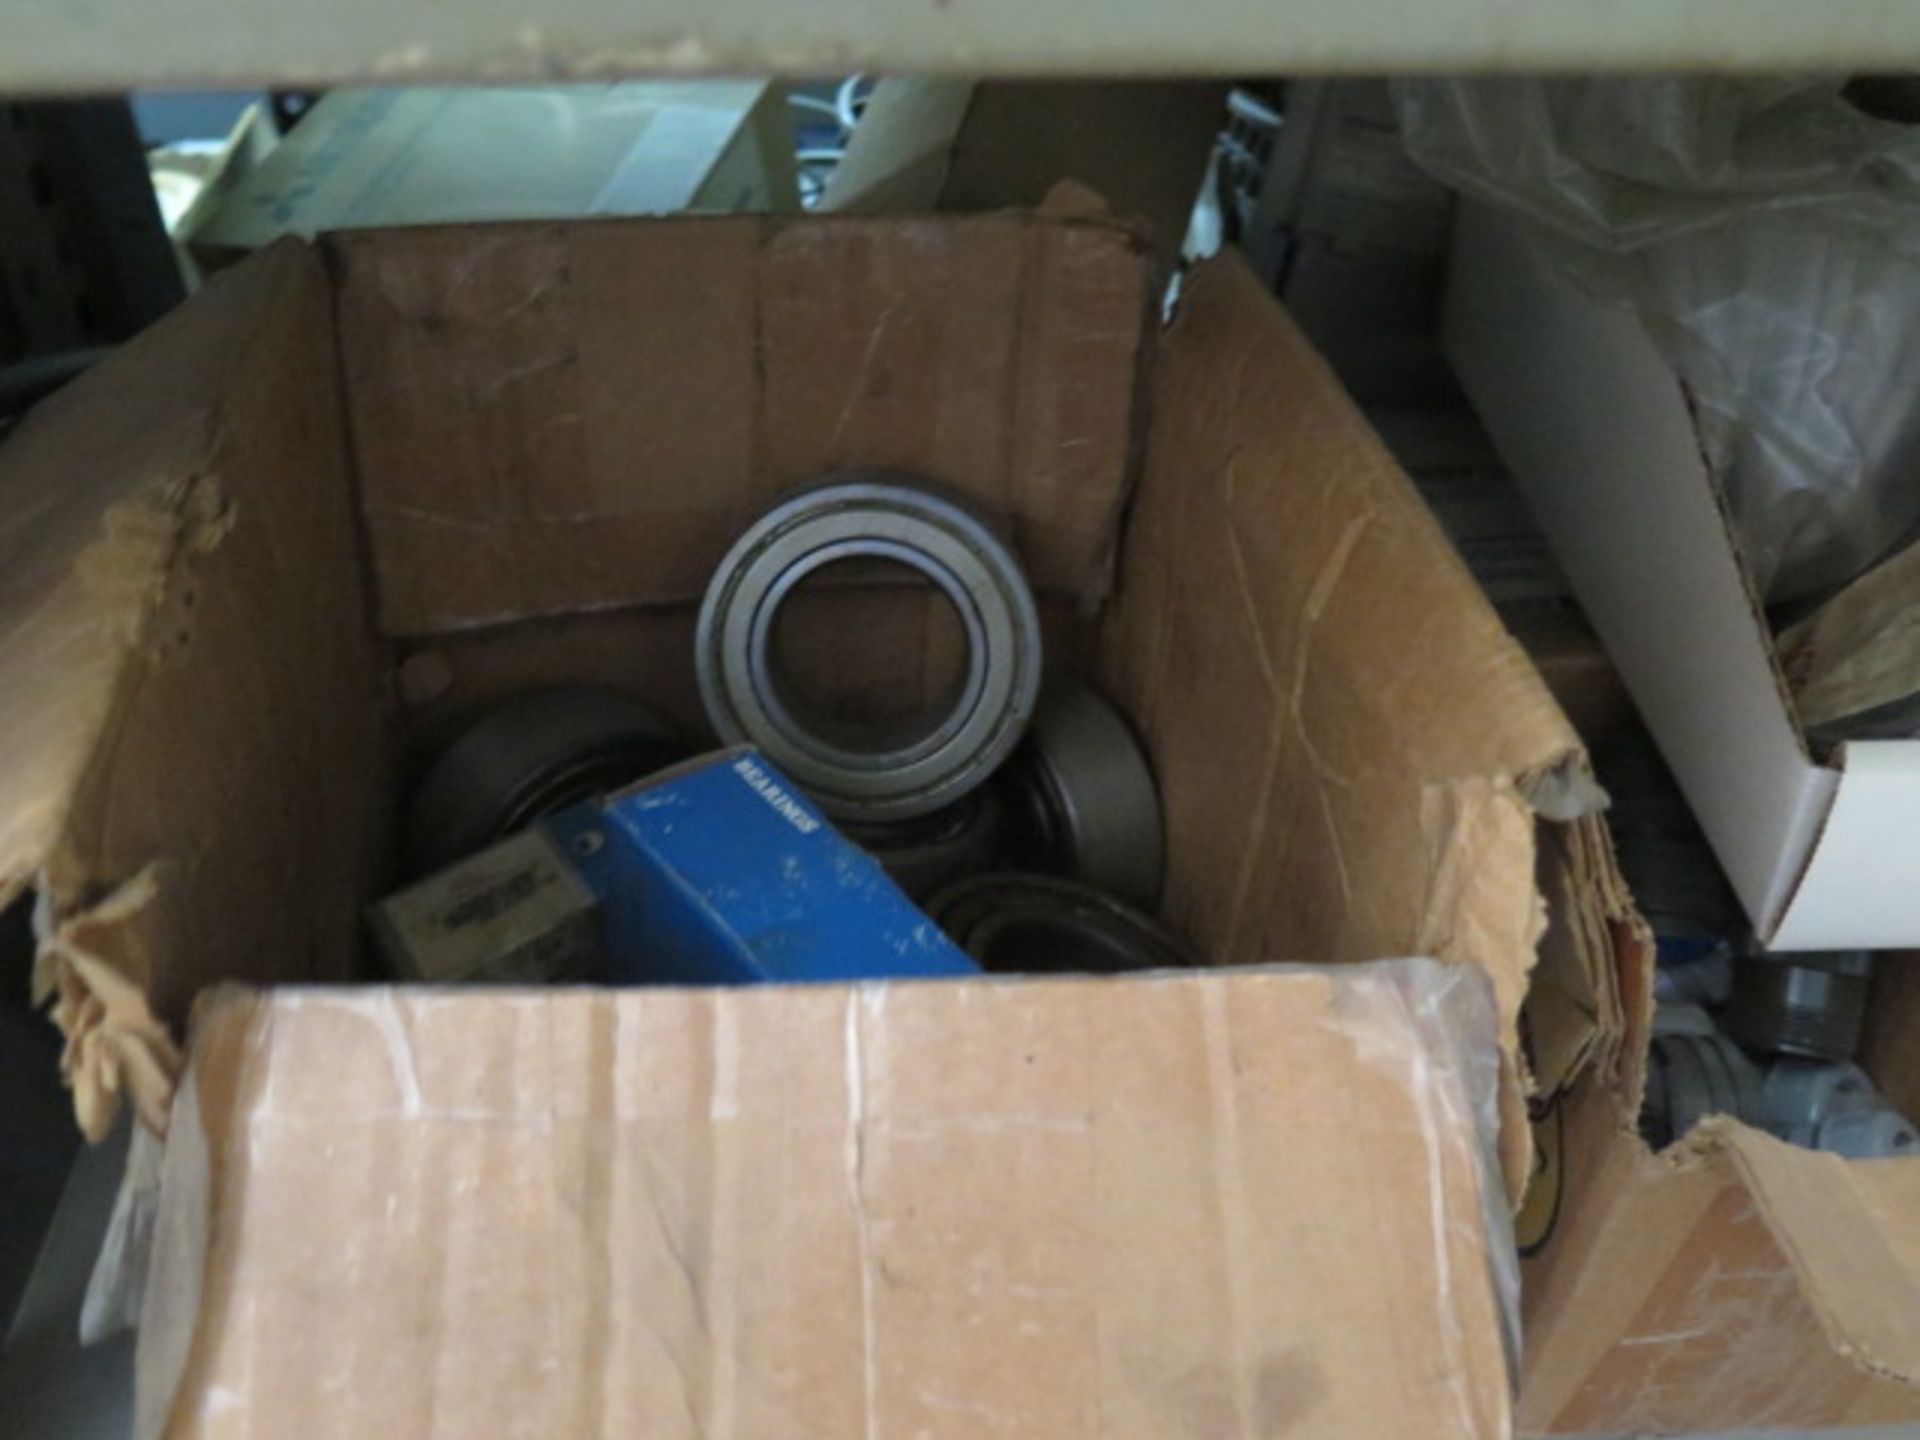 Large Quantity of Machine Replacement Parts Including Spindles, Bearings, Pneumatic Collet - Image 6 of 30